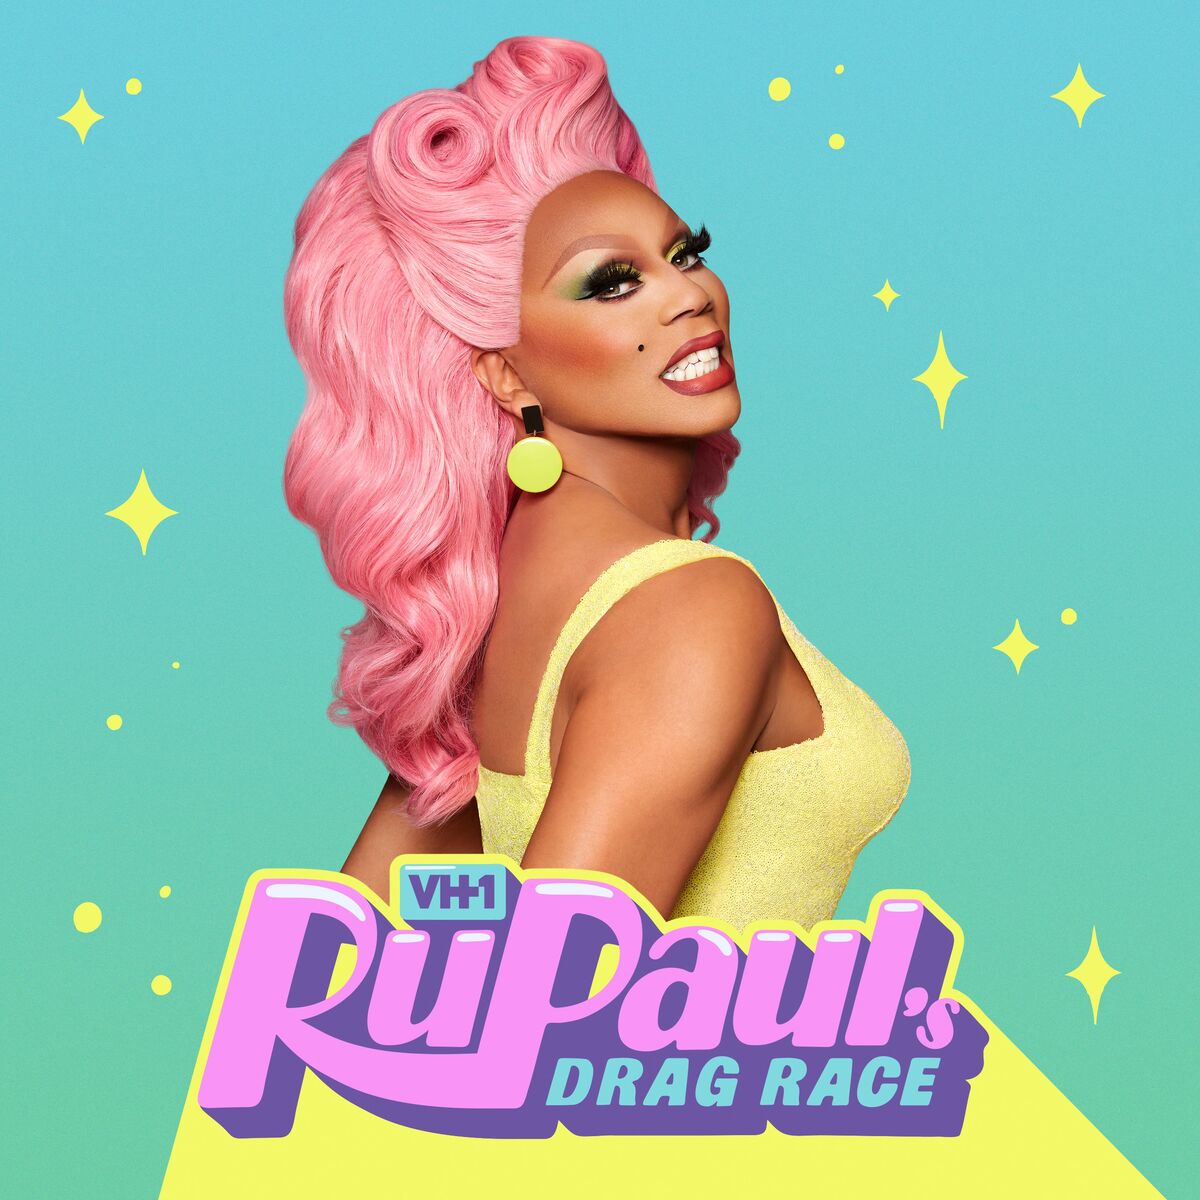 this makes me happy, the highest rated season on imdb of the entire  franchise along with as2 : r/rupaulsdragrace